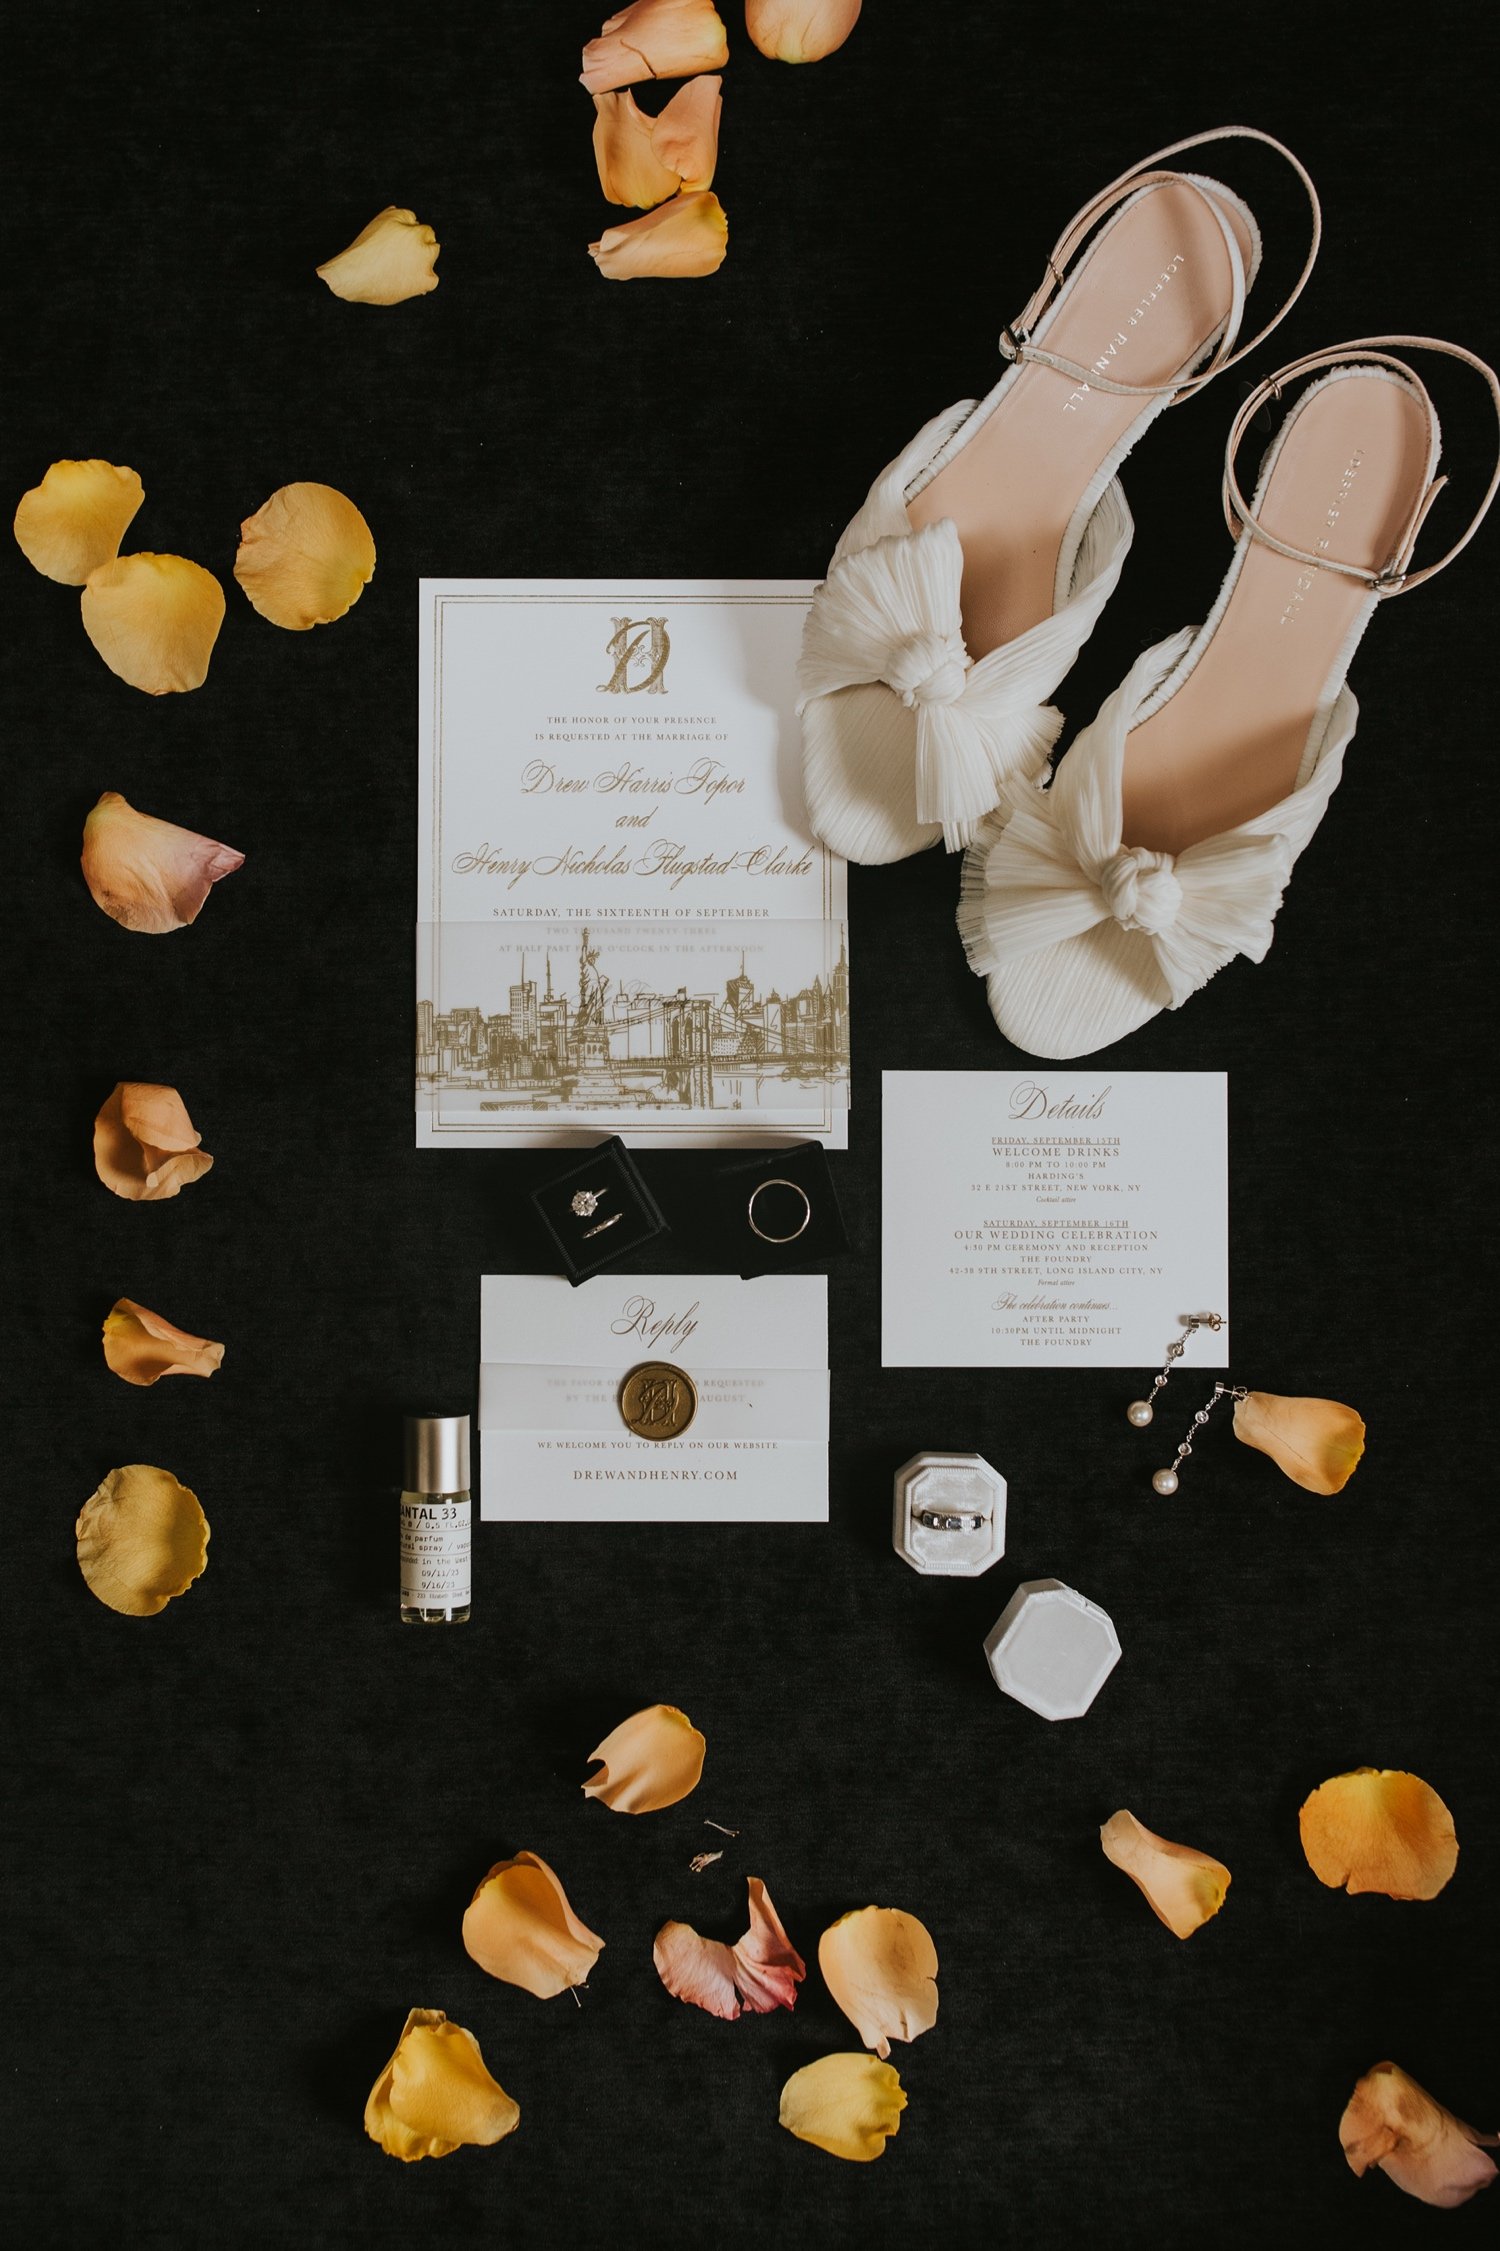 Hudson Valley Wedding Photographer, The Foundry LIC Wedding, The Foundry Wedding, Wedding Flat Lay, Wedding Details, Bride Getting Ready 